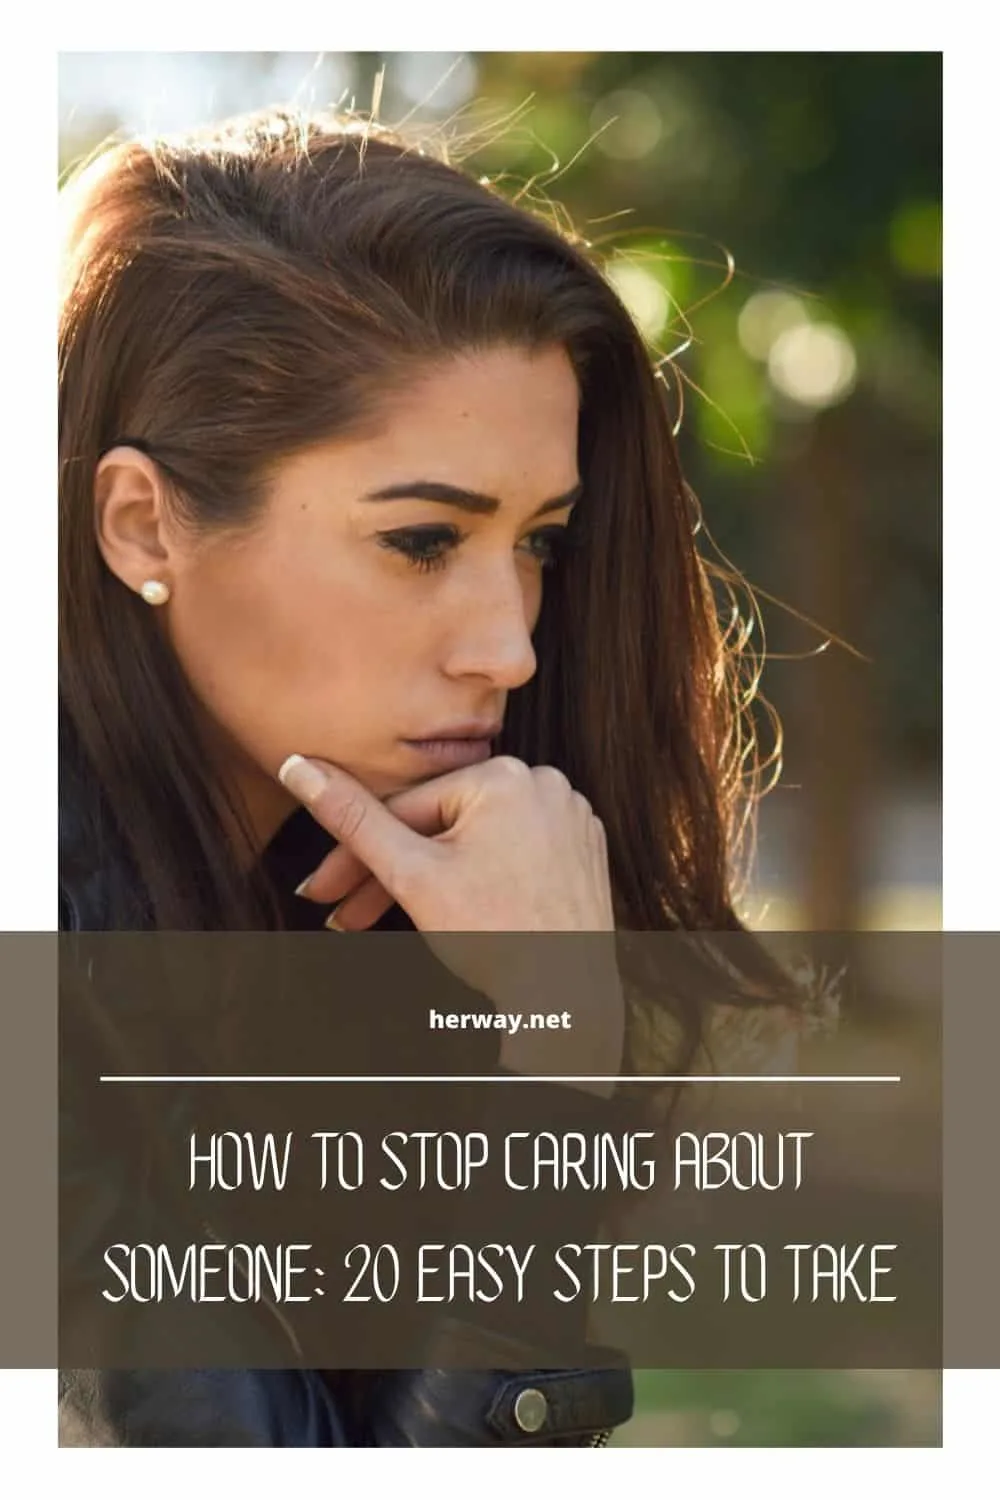 How To Stop Caring About Someone: 20 Easy Steps To Take